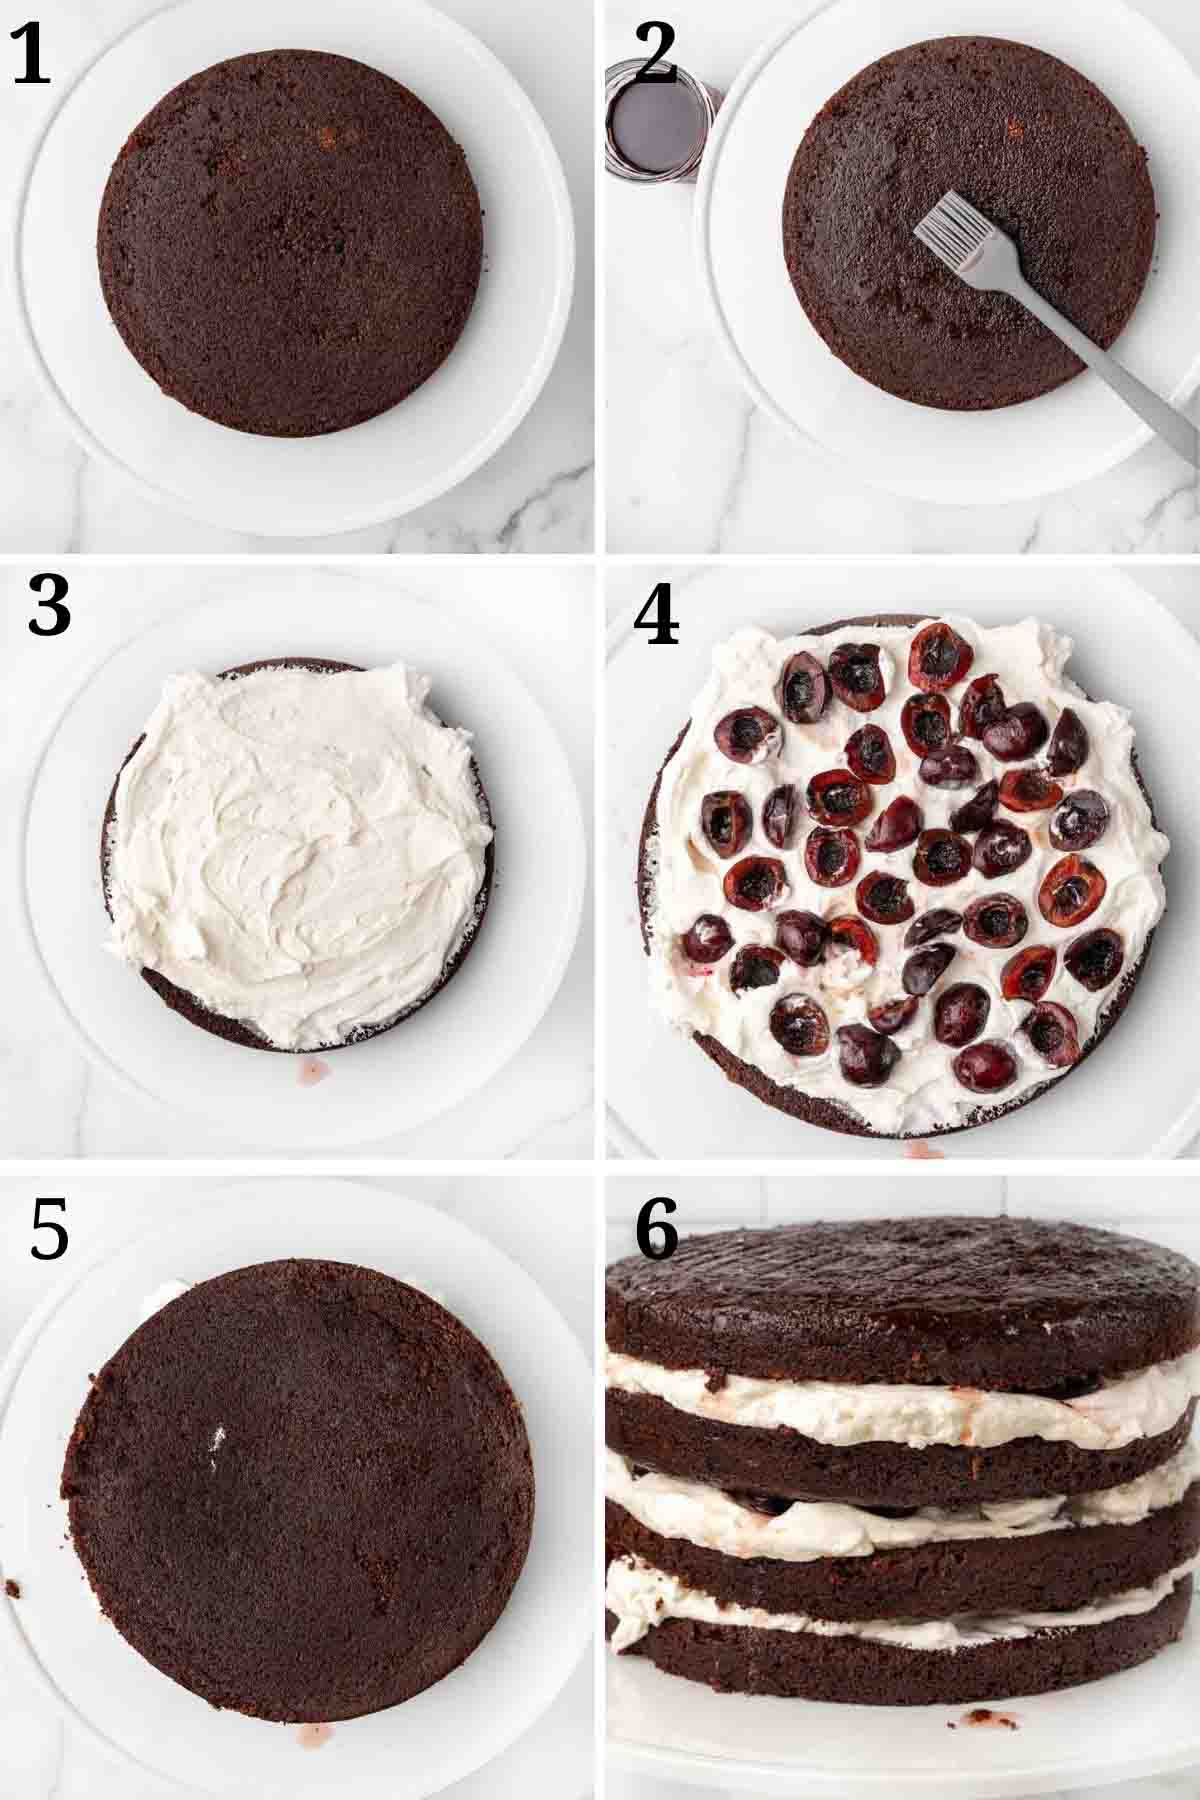 6 images showing how to assemble black forrest cake